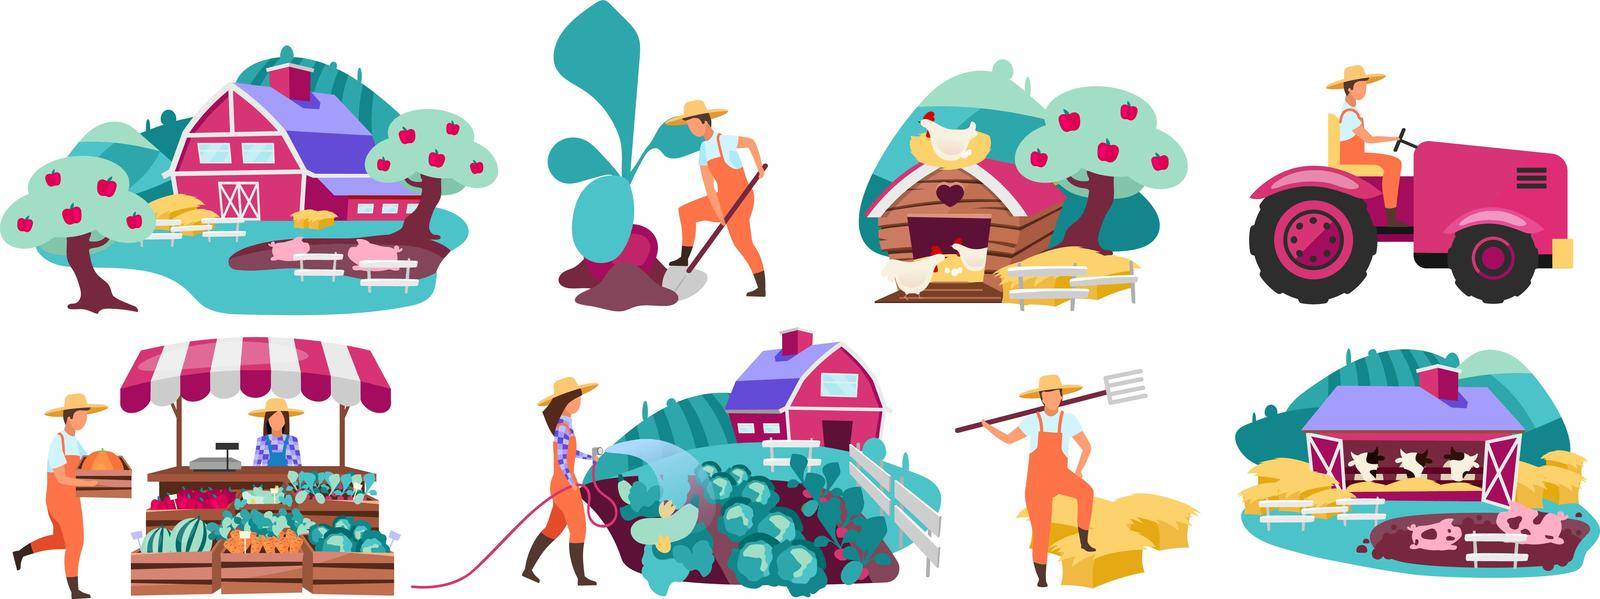 Farm flat vector illustrations set. Horticulture and vegetable gardening. Farmers market produce concept. Cattle, livestock and poultry farming. Agricultural plantation. Rural, village farmland by ntl